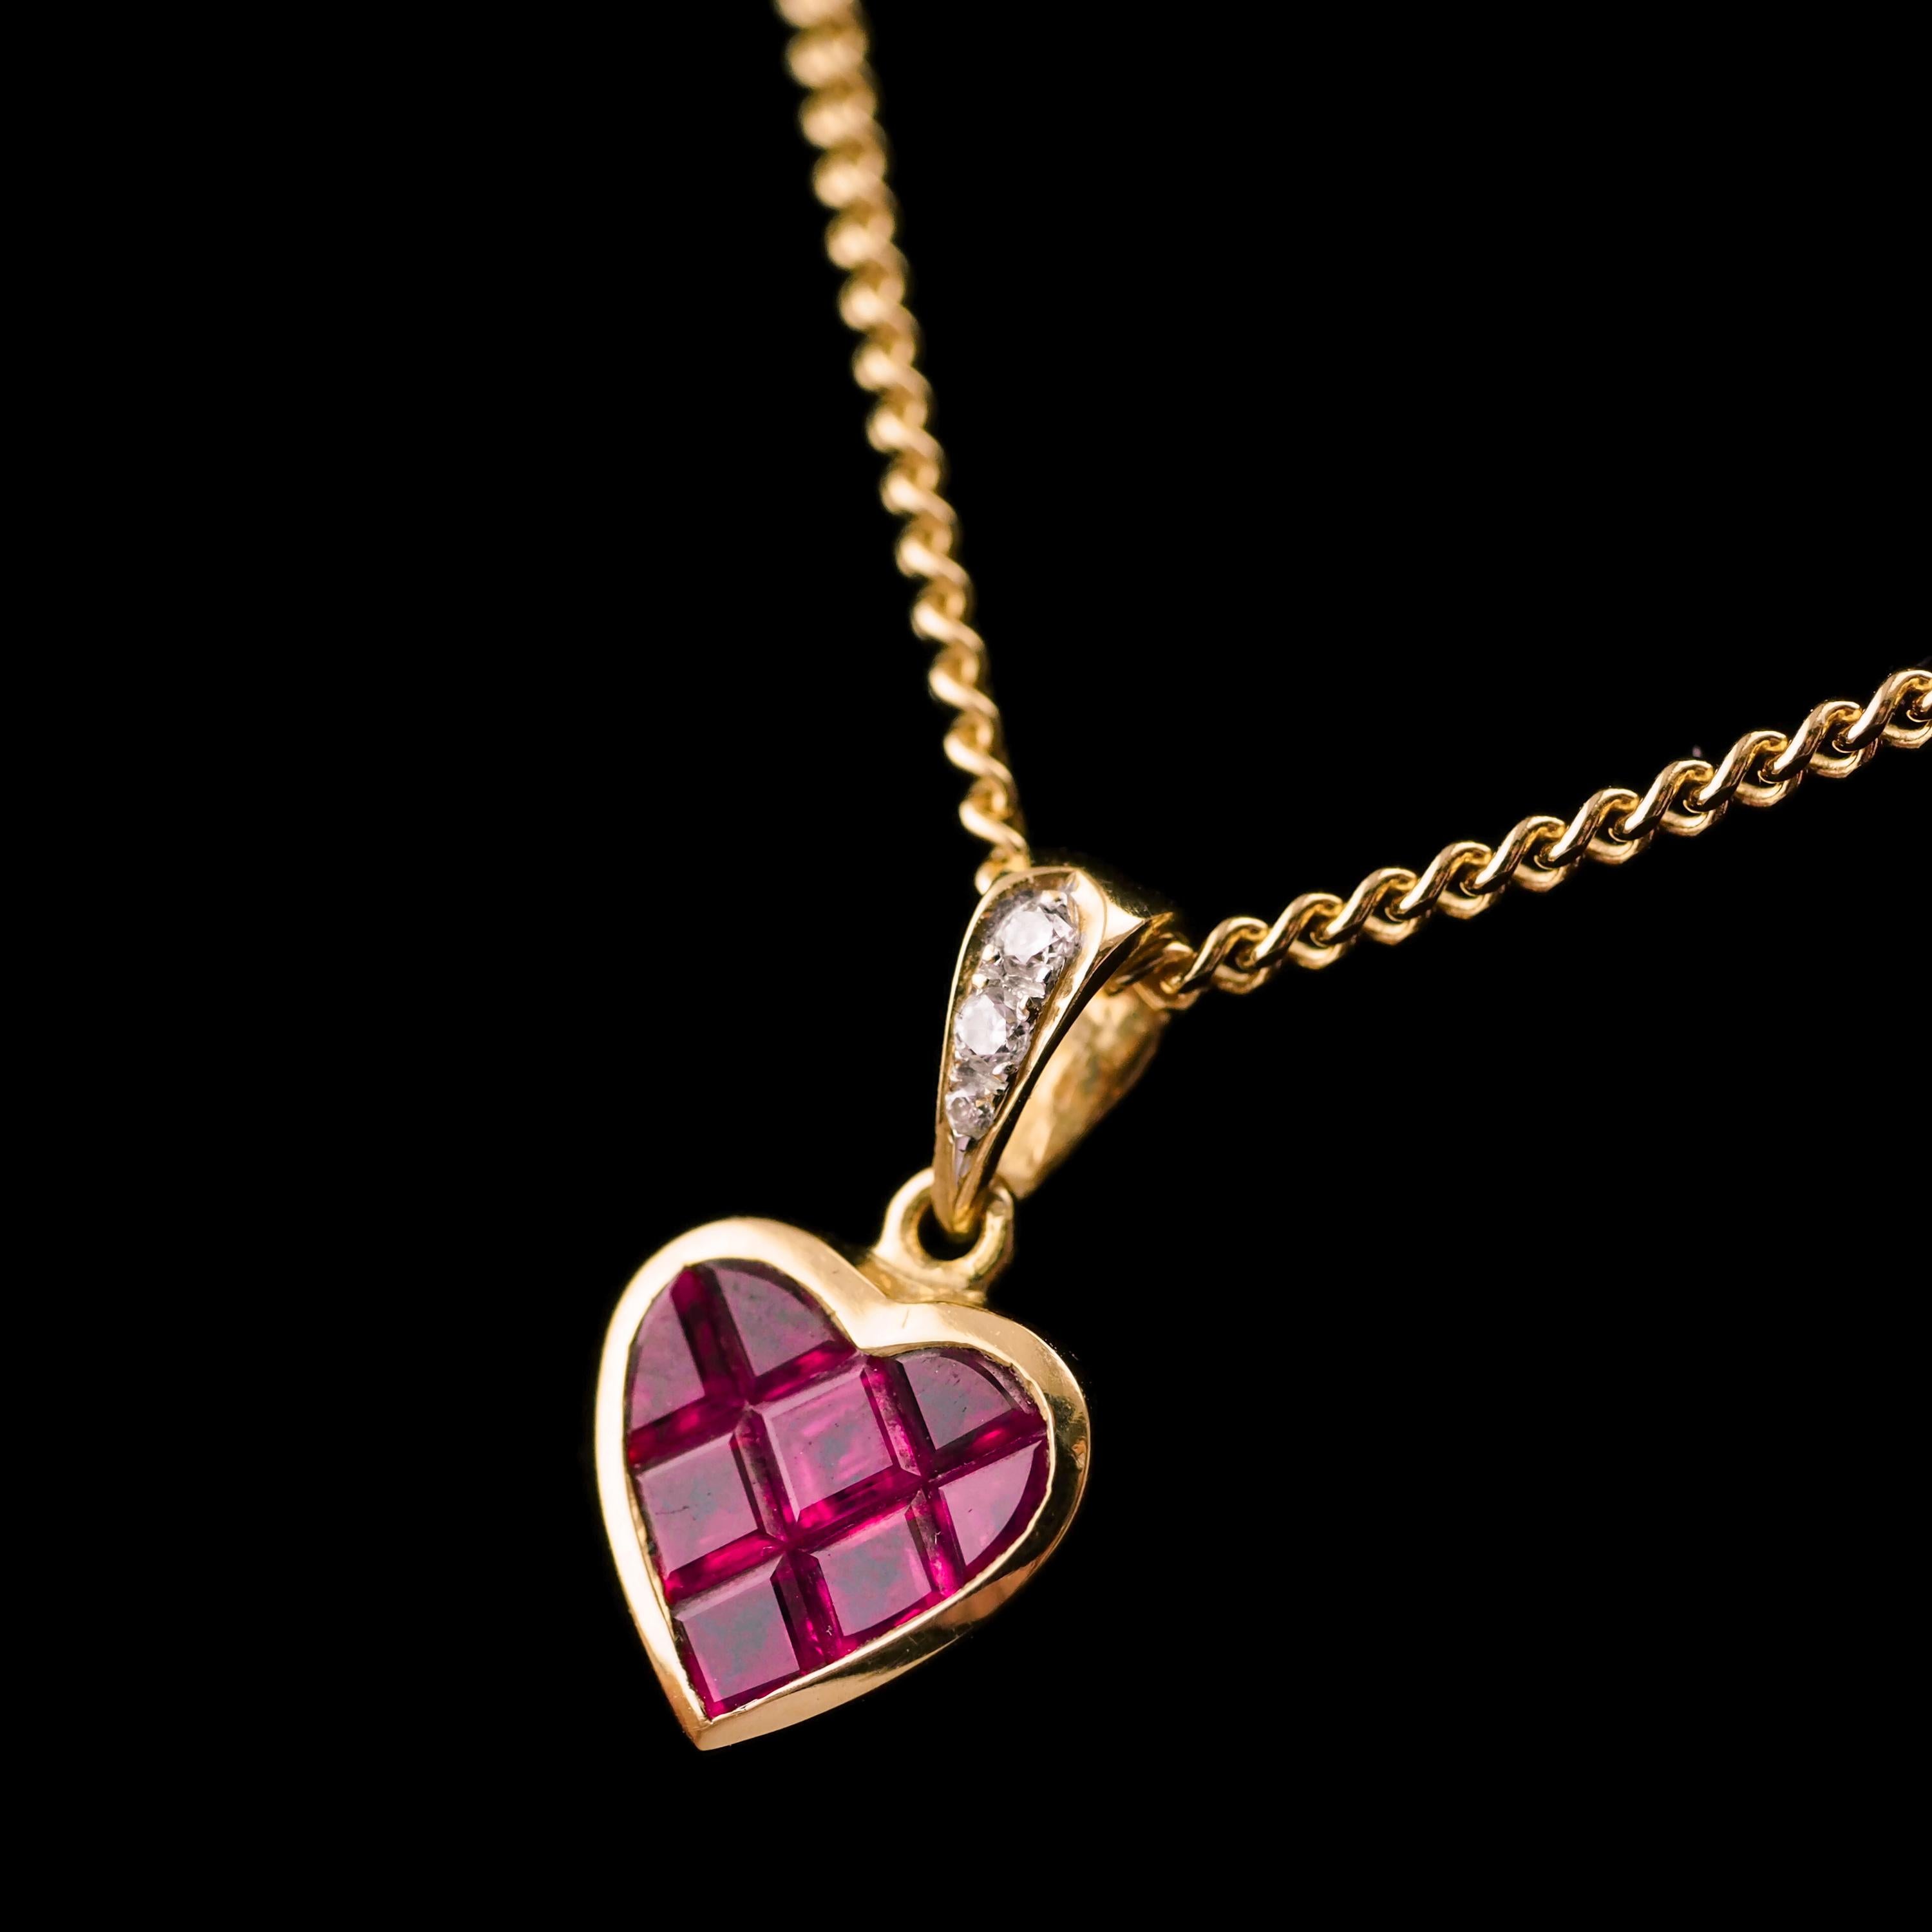 We are delighted to offer this lovely Vintage 18K gold ruby necklace (chain is included and is also 18K solid gold). 
 
The pendant features a latticework design with 8 finely set rubies all faceted and forming a heart shape. The 'ball' of the